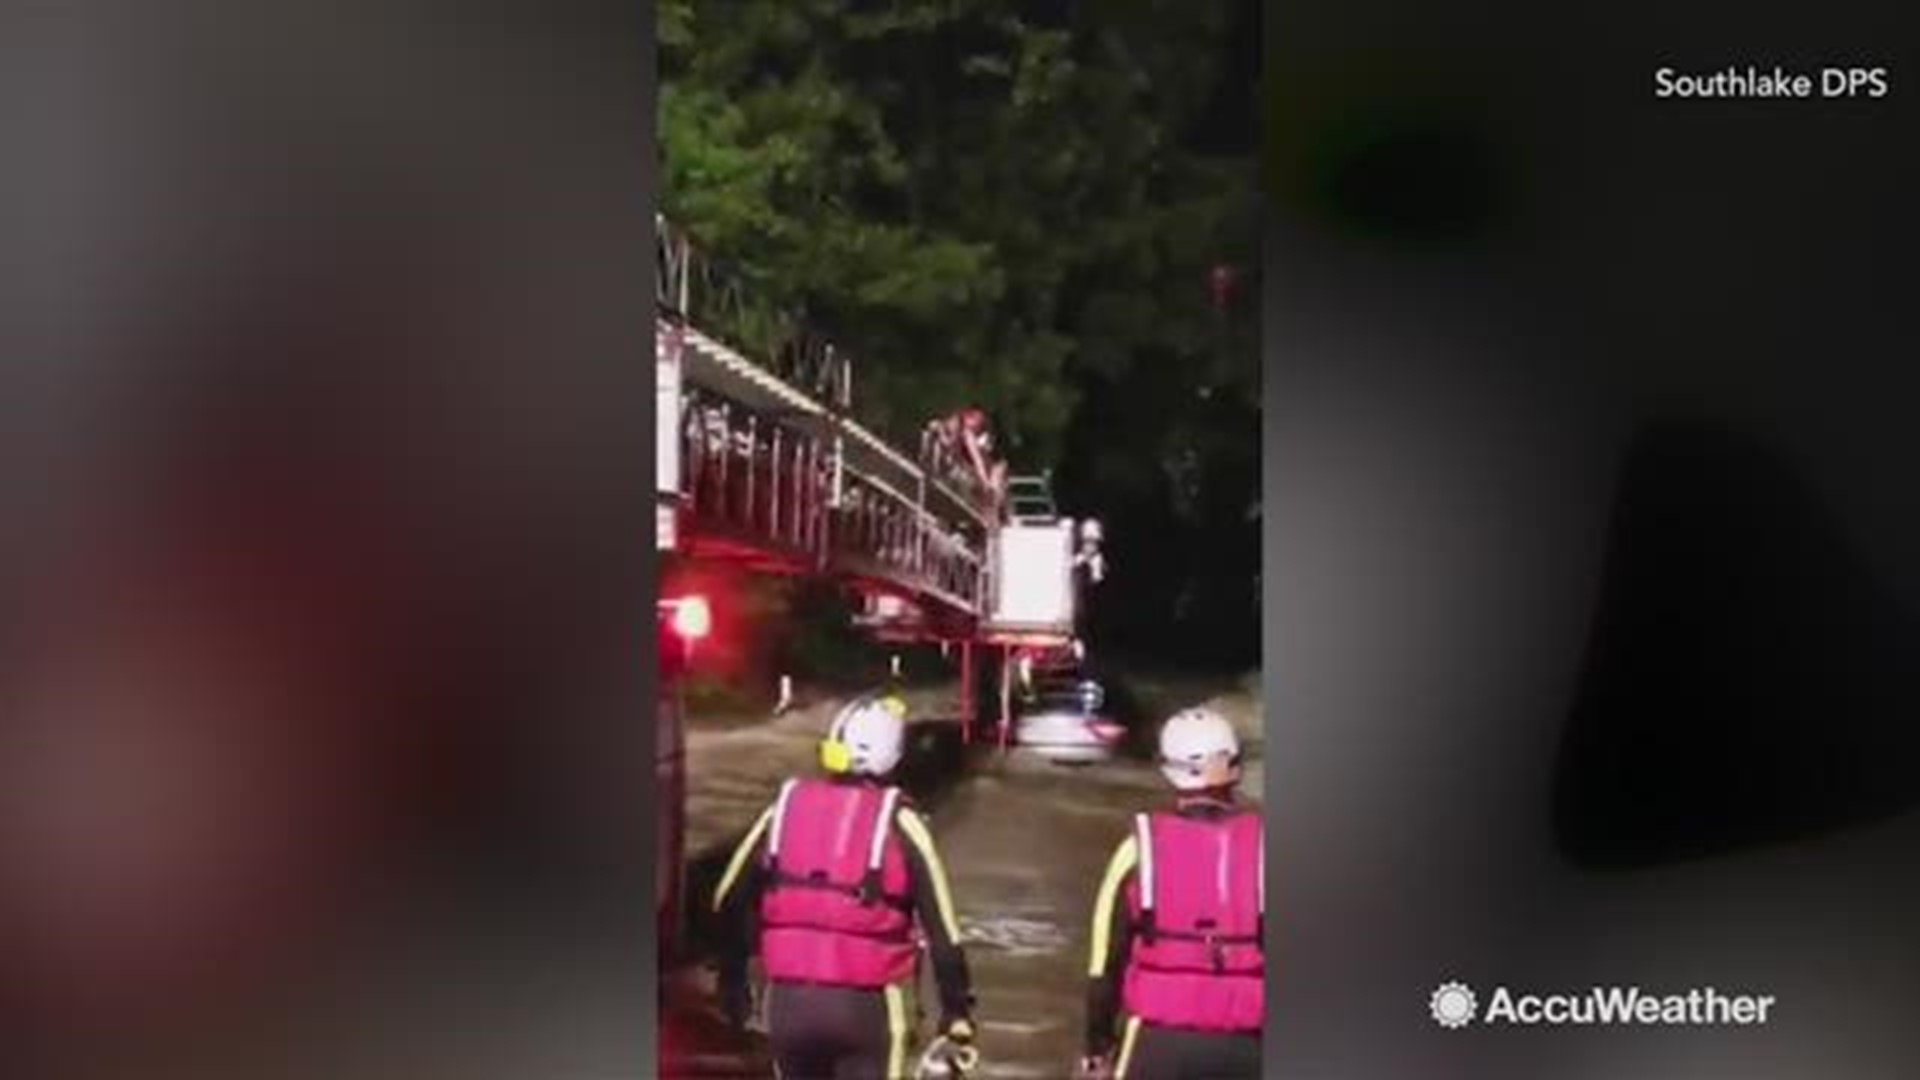 A father and two teenage daughters were trapped in their car from flooded road that turned into a raging river on Sept. 22 in Southlake, Texas.  Firefighters were able to rescue them by breaking the back window and transporting them with a ladder.